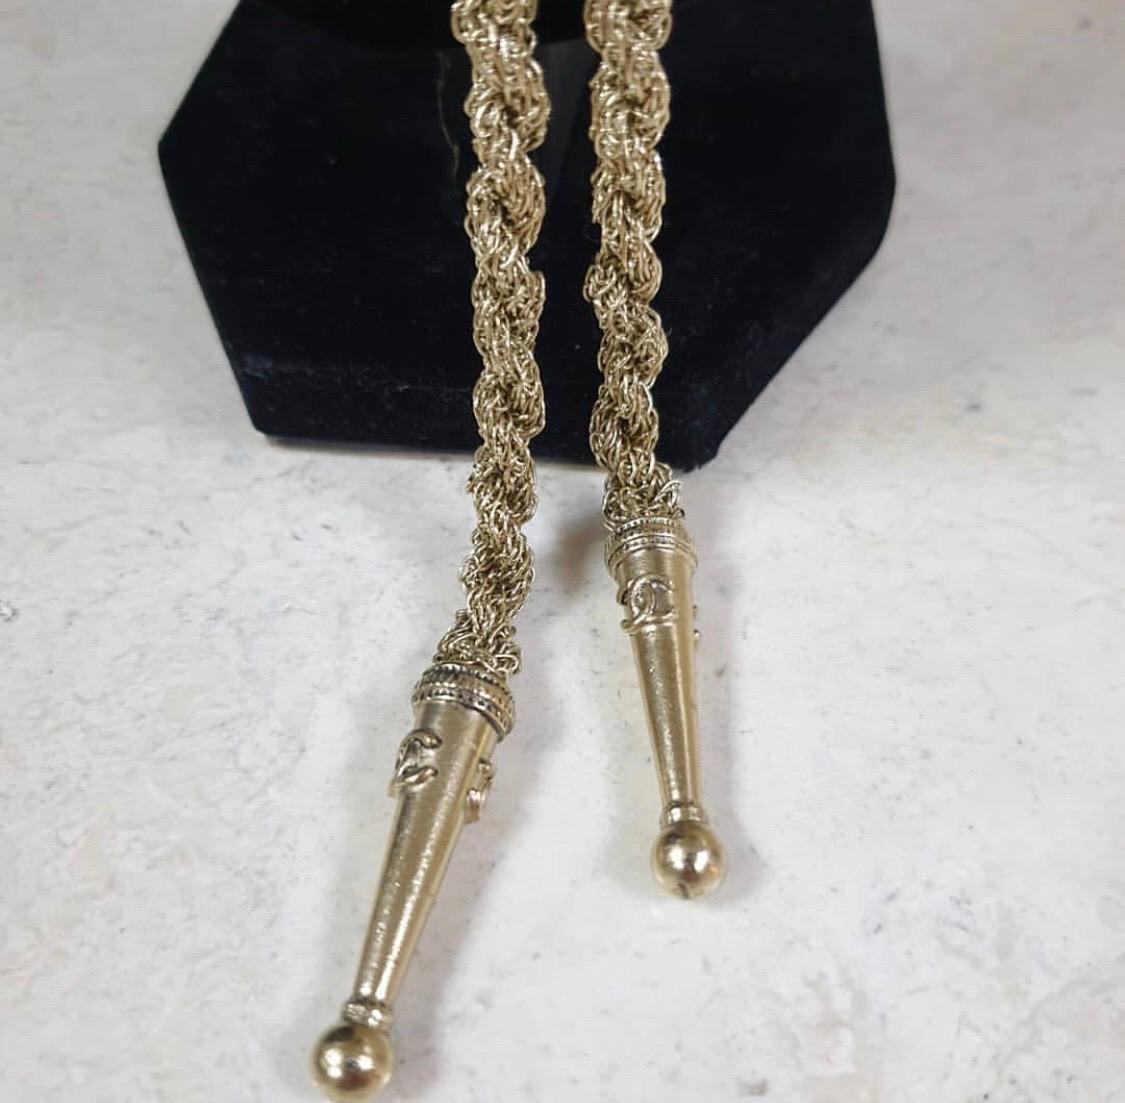 From the 2014 Pre-Fall Chanel collection this Metier D'Art Paris Dallas Necklace features a rope necklace with different badges attached and the classic CC.

Condition is like new.

No original packaging.